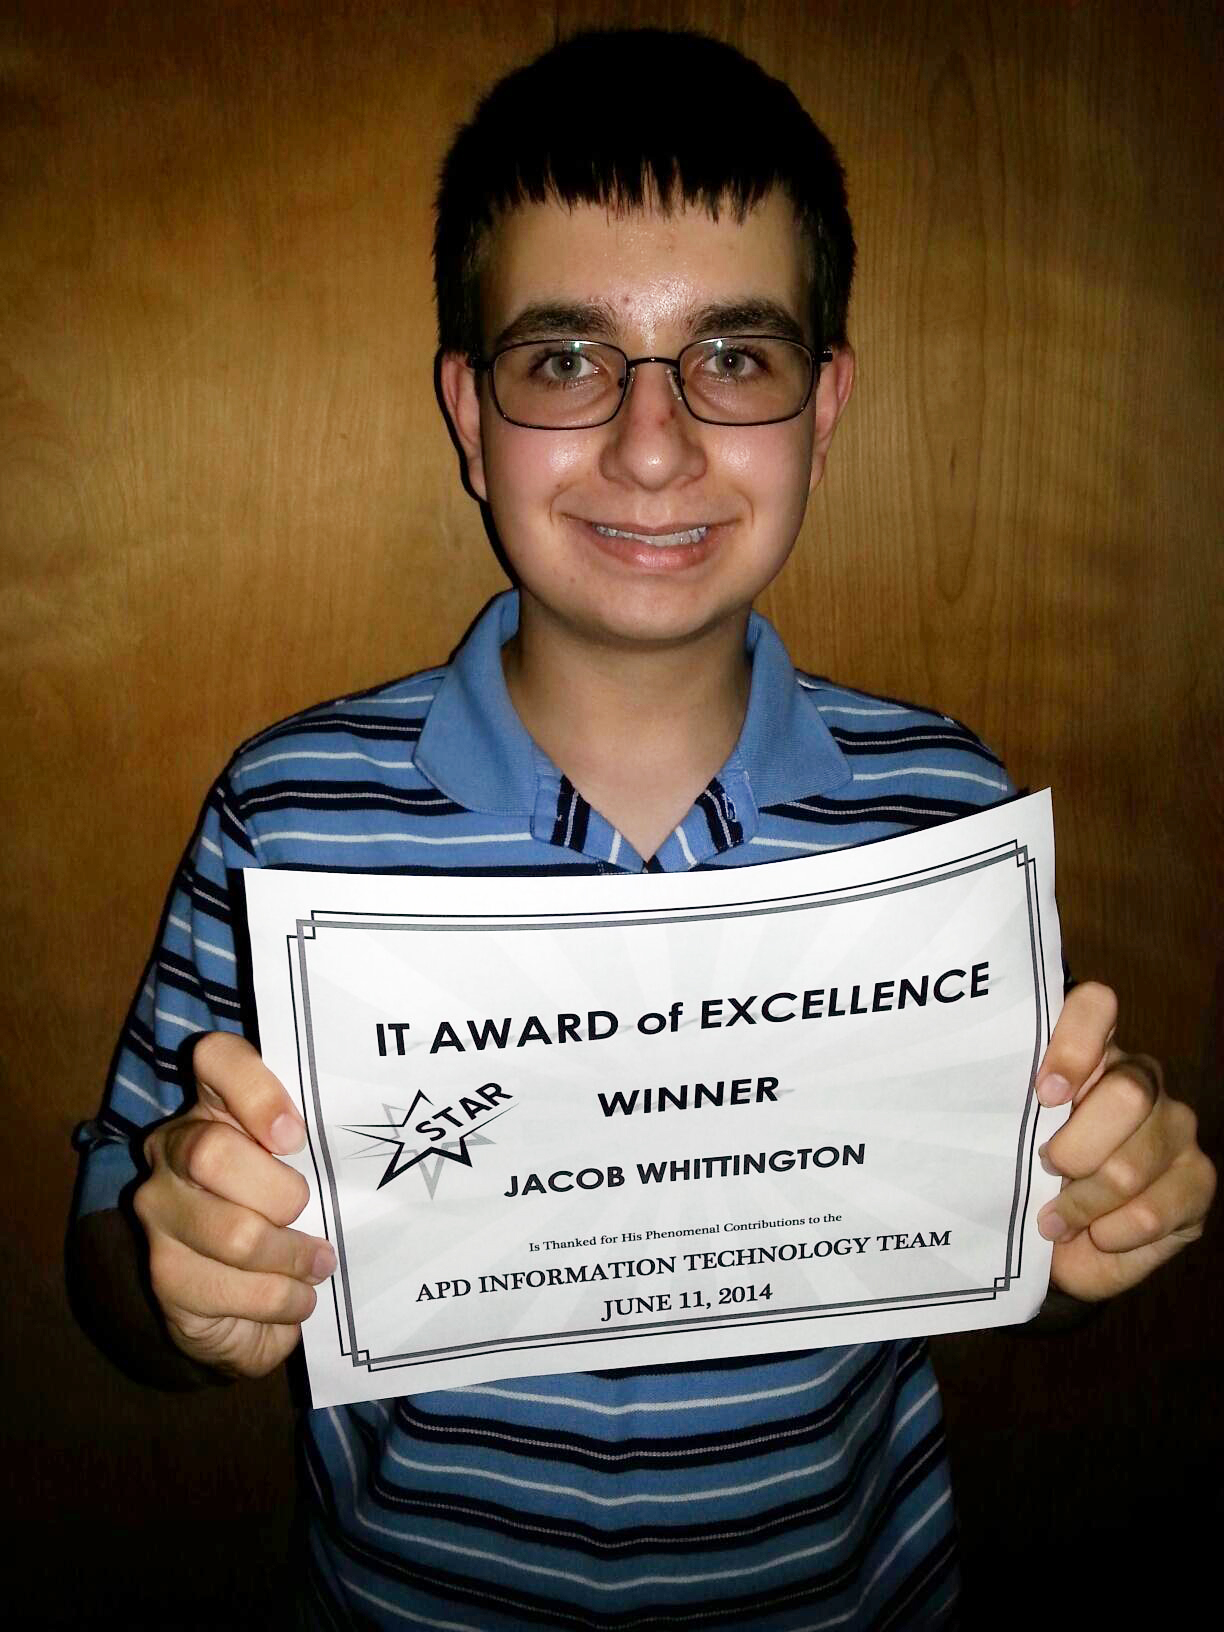 APD Intern Jacob Whittington was presented with the IT Award for Excellence.